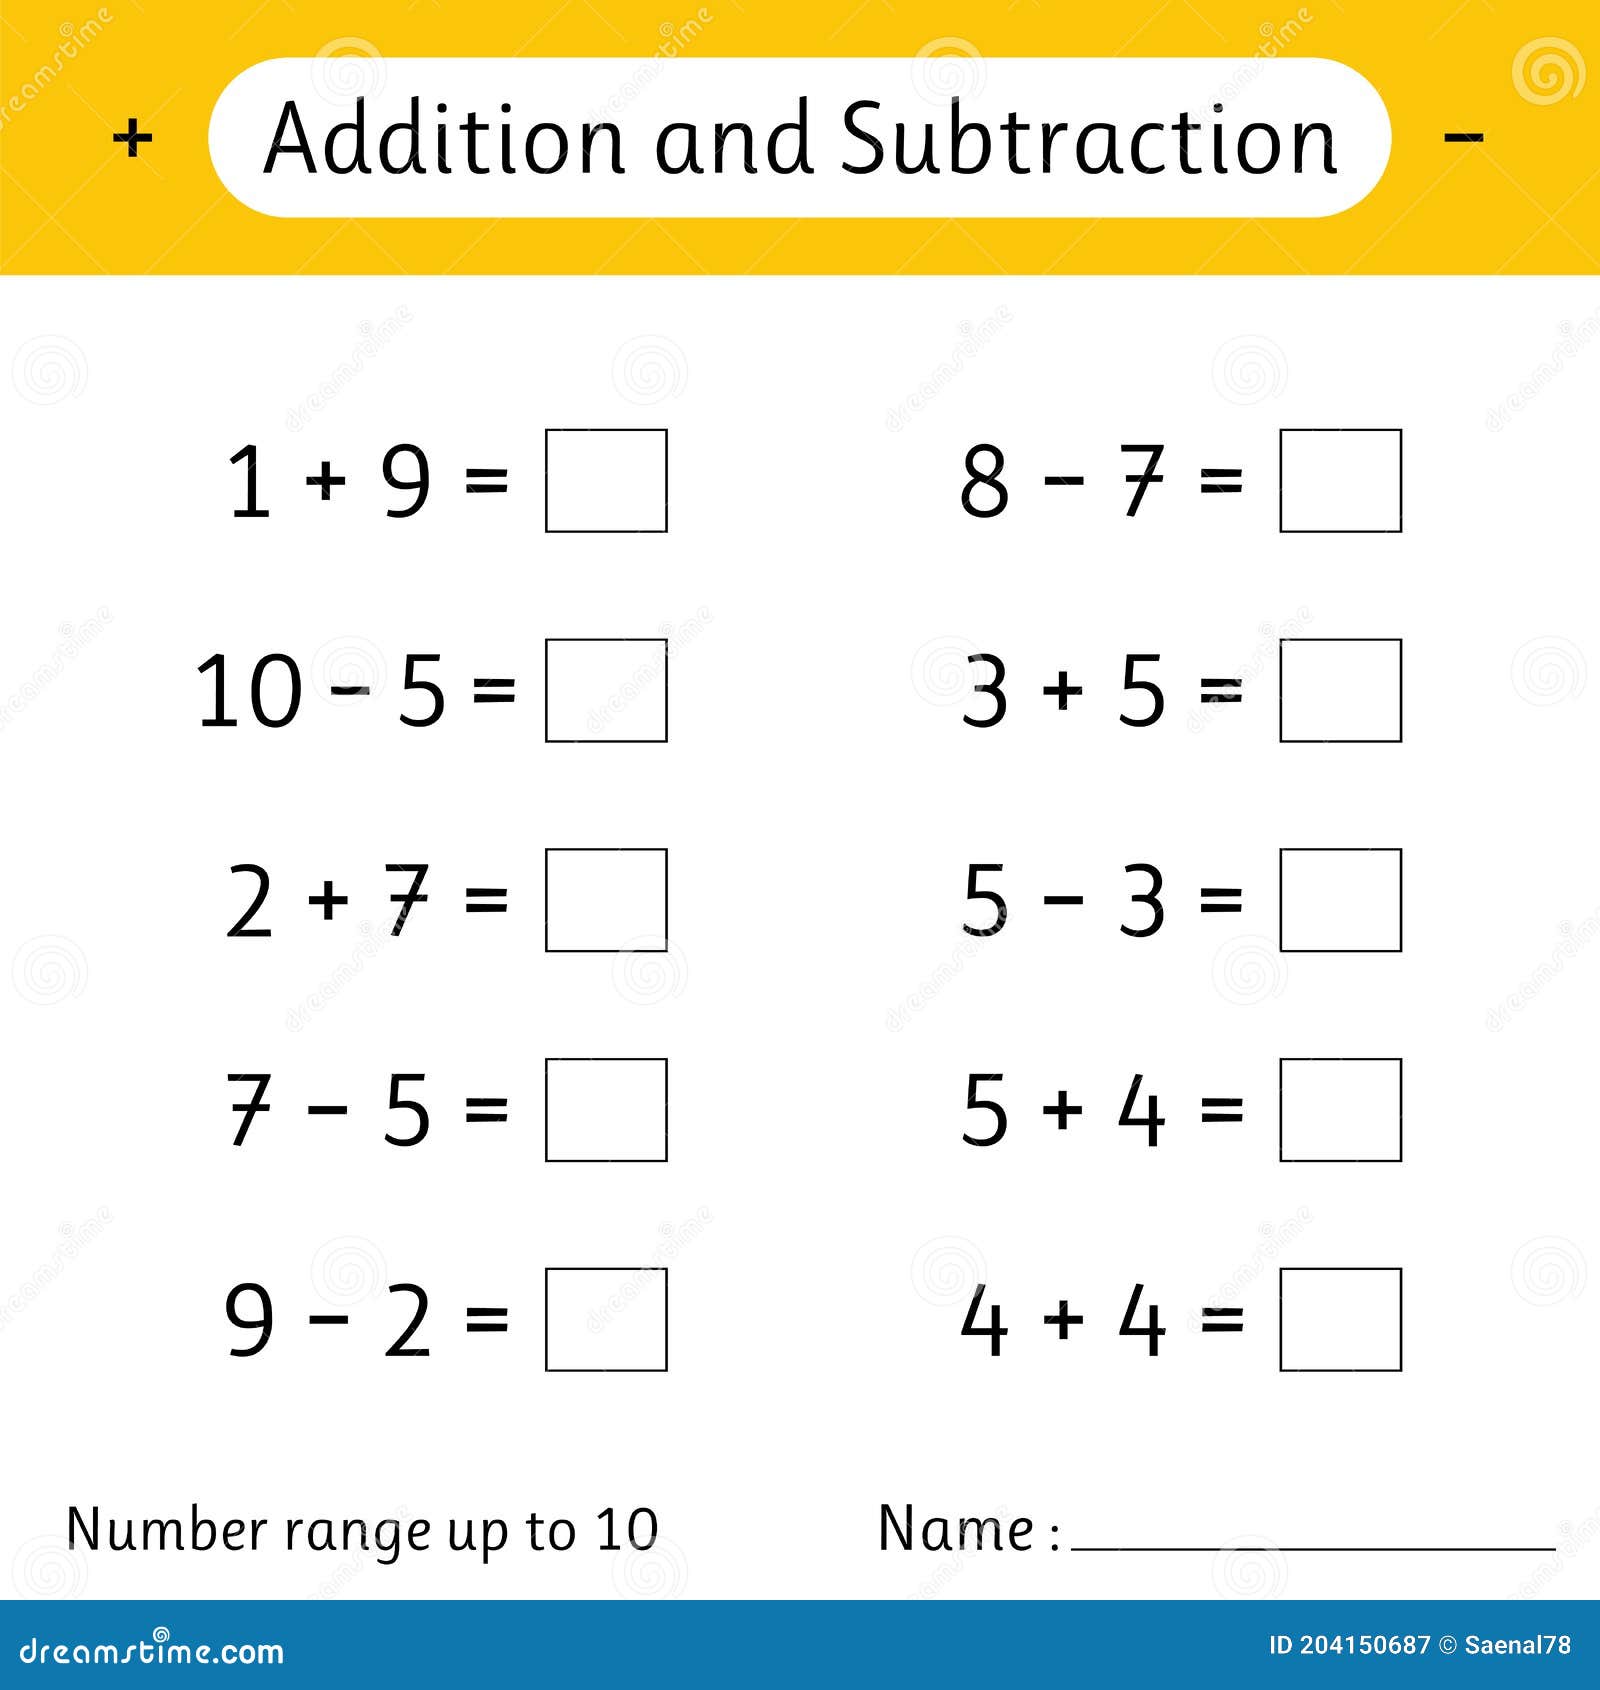 subtraction-number-range-up-to-20-math-worksheet-for-kids-mathematics-solve-examples-and